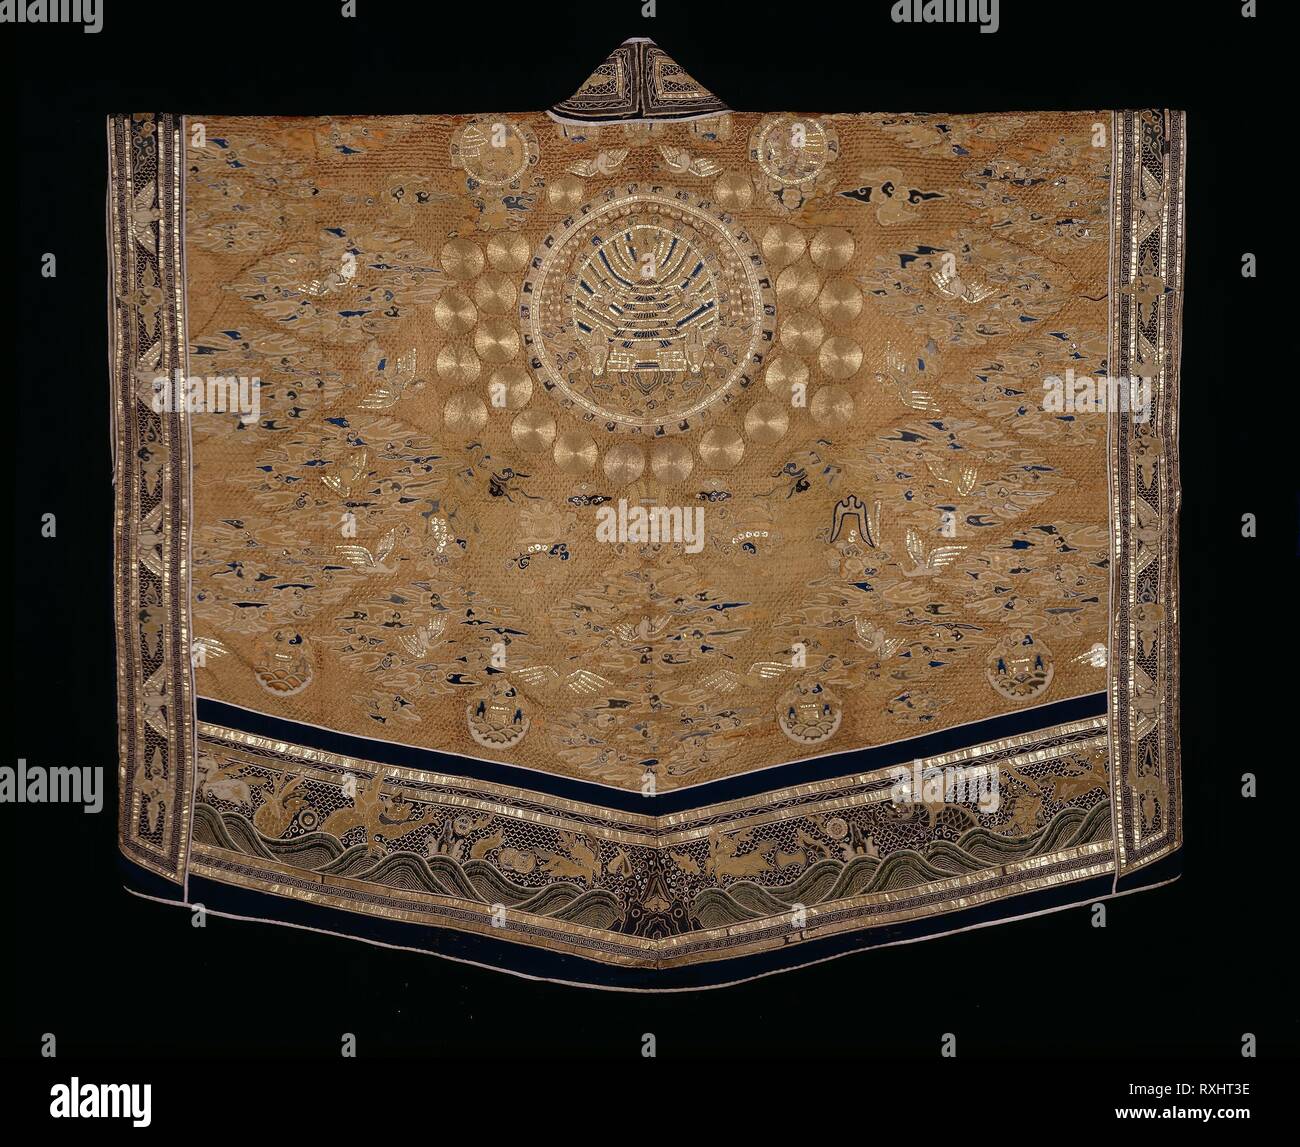 Vestment (For a First-degree Taoist Priest). Zheng Wuda? (Hui- chang, active c. 1793); Han-Chinese; China. Date: 1793. Dimensions: 139.6 × 156.2 cm (55 × 61 1/2 in.). Silk, warp-float faced 7:1 satin weave; embroidered with silk, peacock-feather-wrapped silk, gold-leaf-over-lacquered-paper-strip-wrapped silk, and gold-leaf-over-lacquered paper in surface satin stitches; laid work and couching; appliquéd with forms of silk, plain weaves between two layers of paper, some with gold- and silver-leaf-over-lacquered paper, and embroidered with silk in chain and knot stitches, needle looping with lai Stock Photo